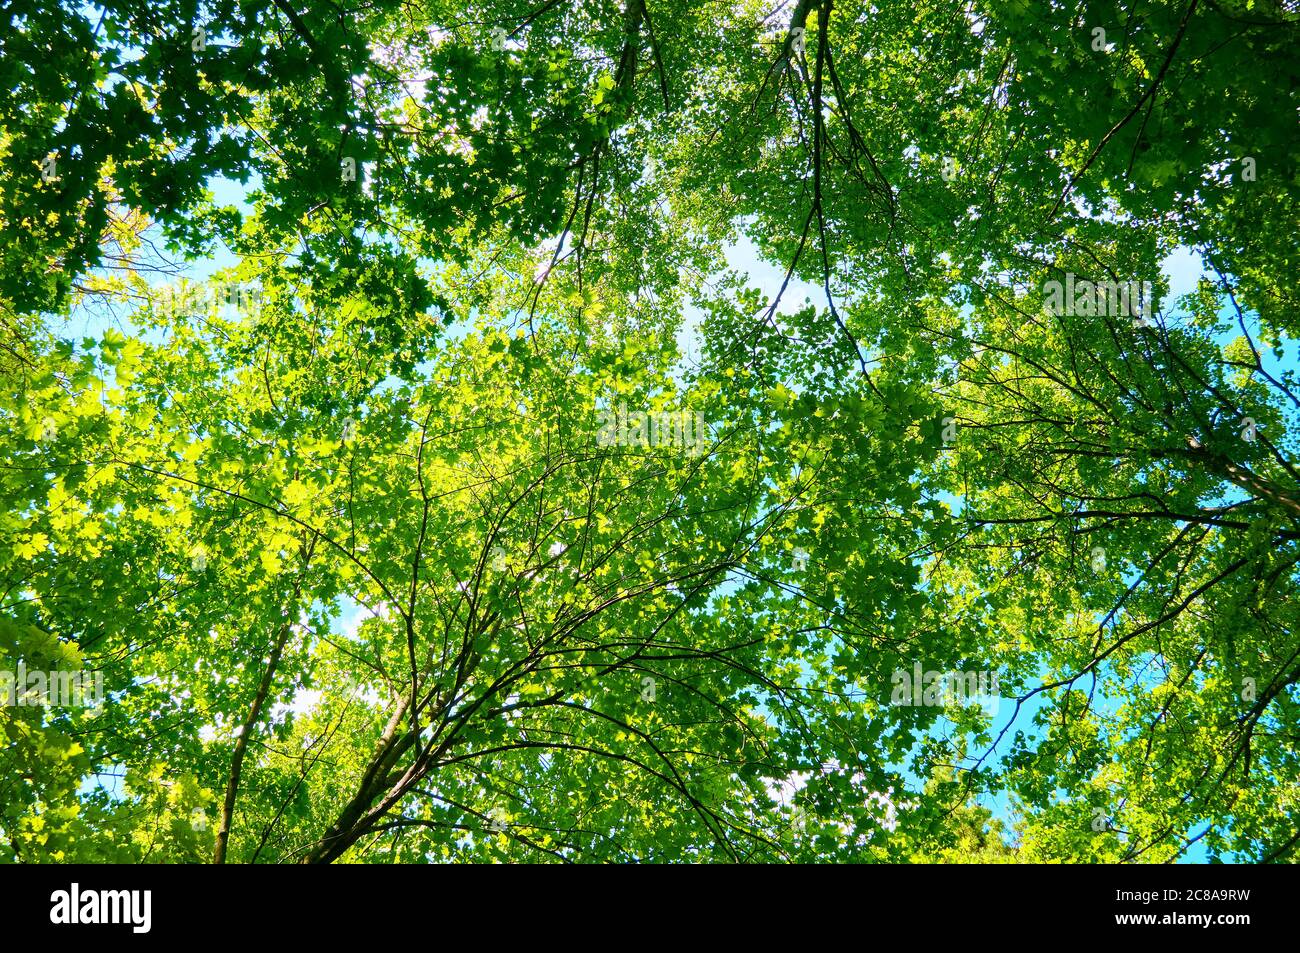 The foliage of the trees against the blue sky. Stock Photo